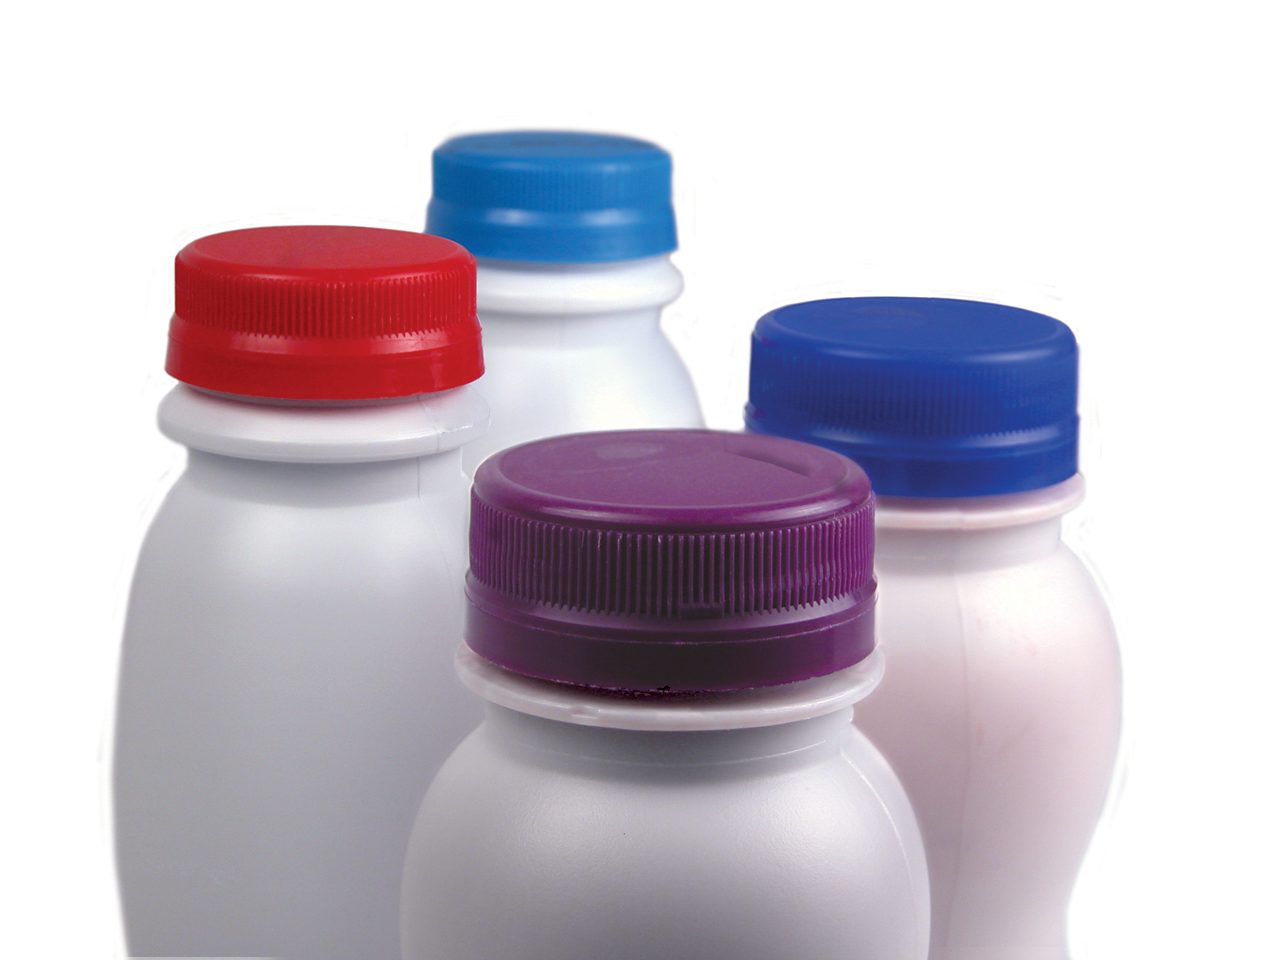 Four single-serve dairy containers with purple, red, light blue and royal blue compression molded closures on white background